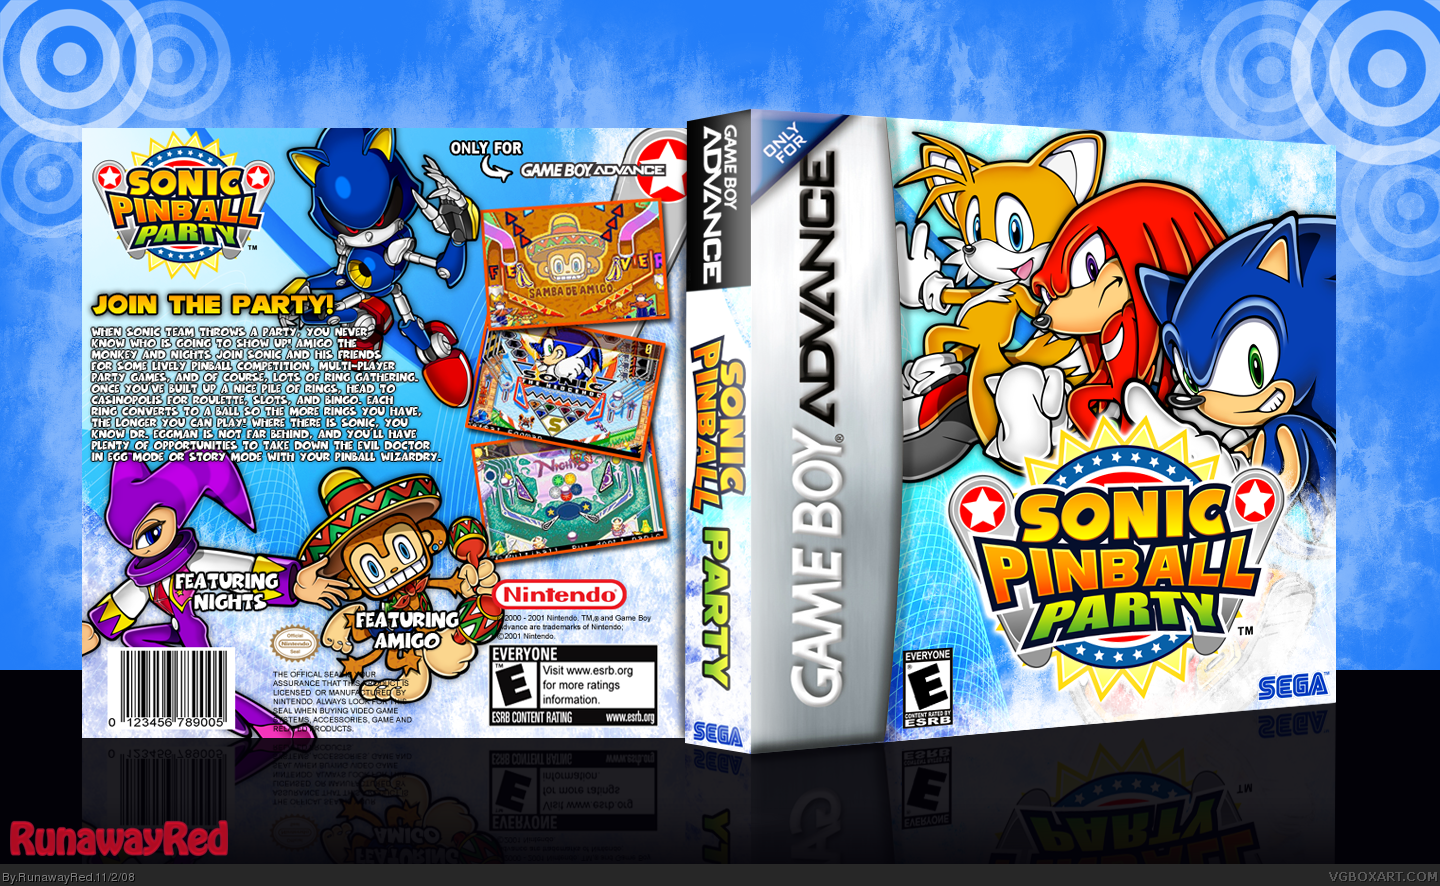 Sonic Pinball Party box cover